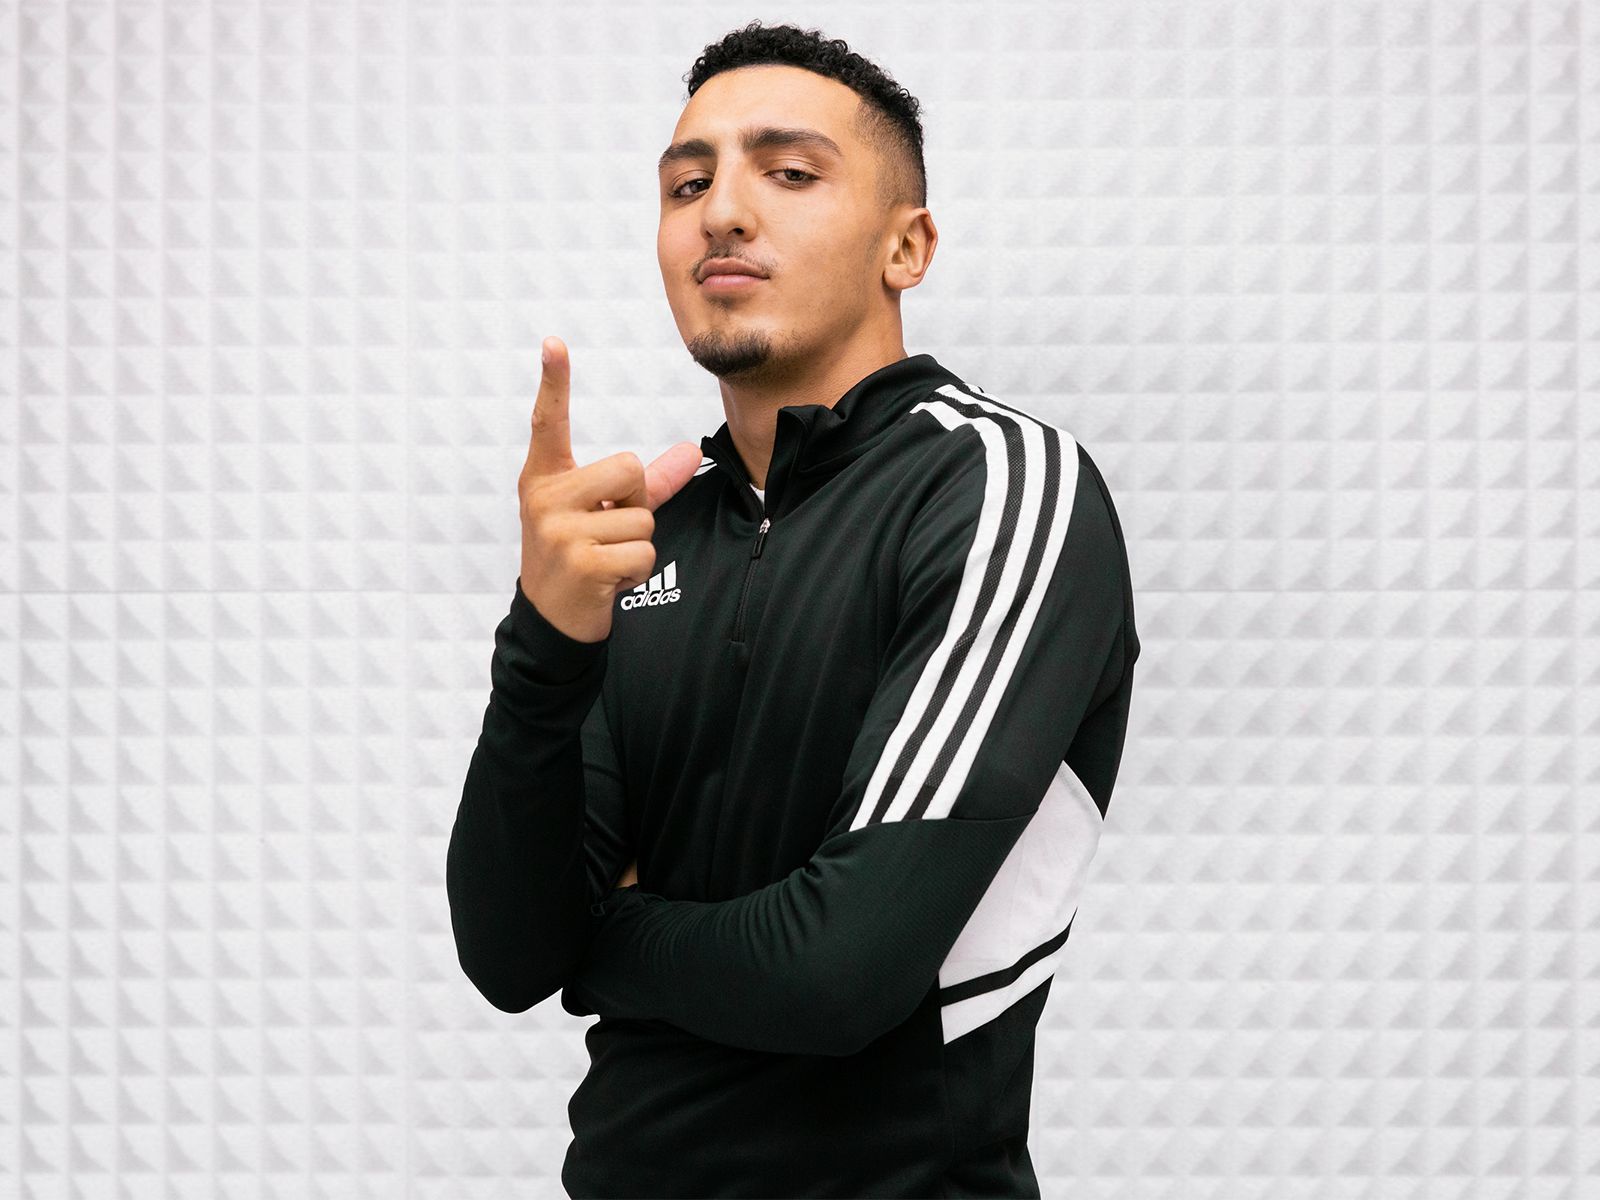 Morad inaugurates the first adidas flagship store in Barcelona with a music session at Gallery